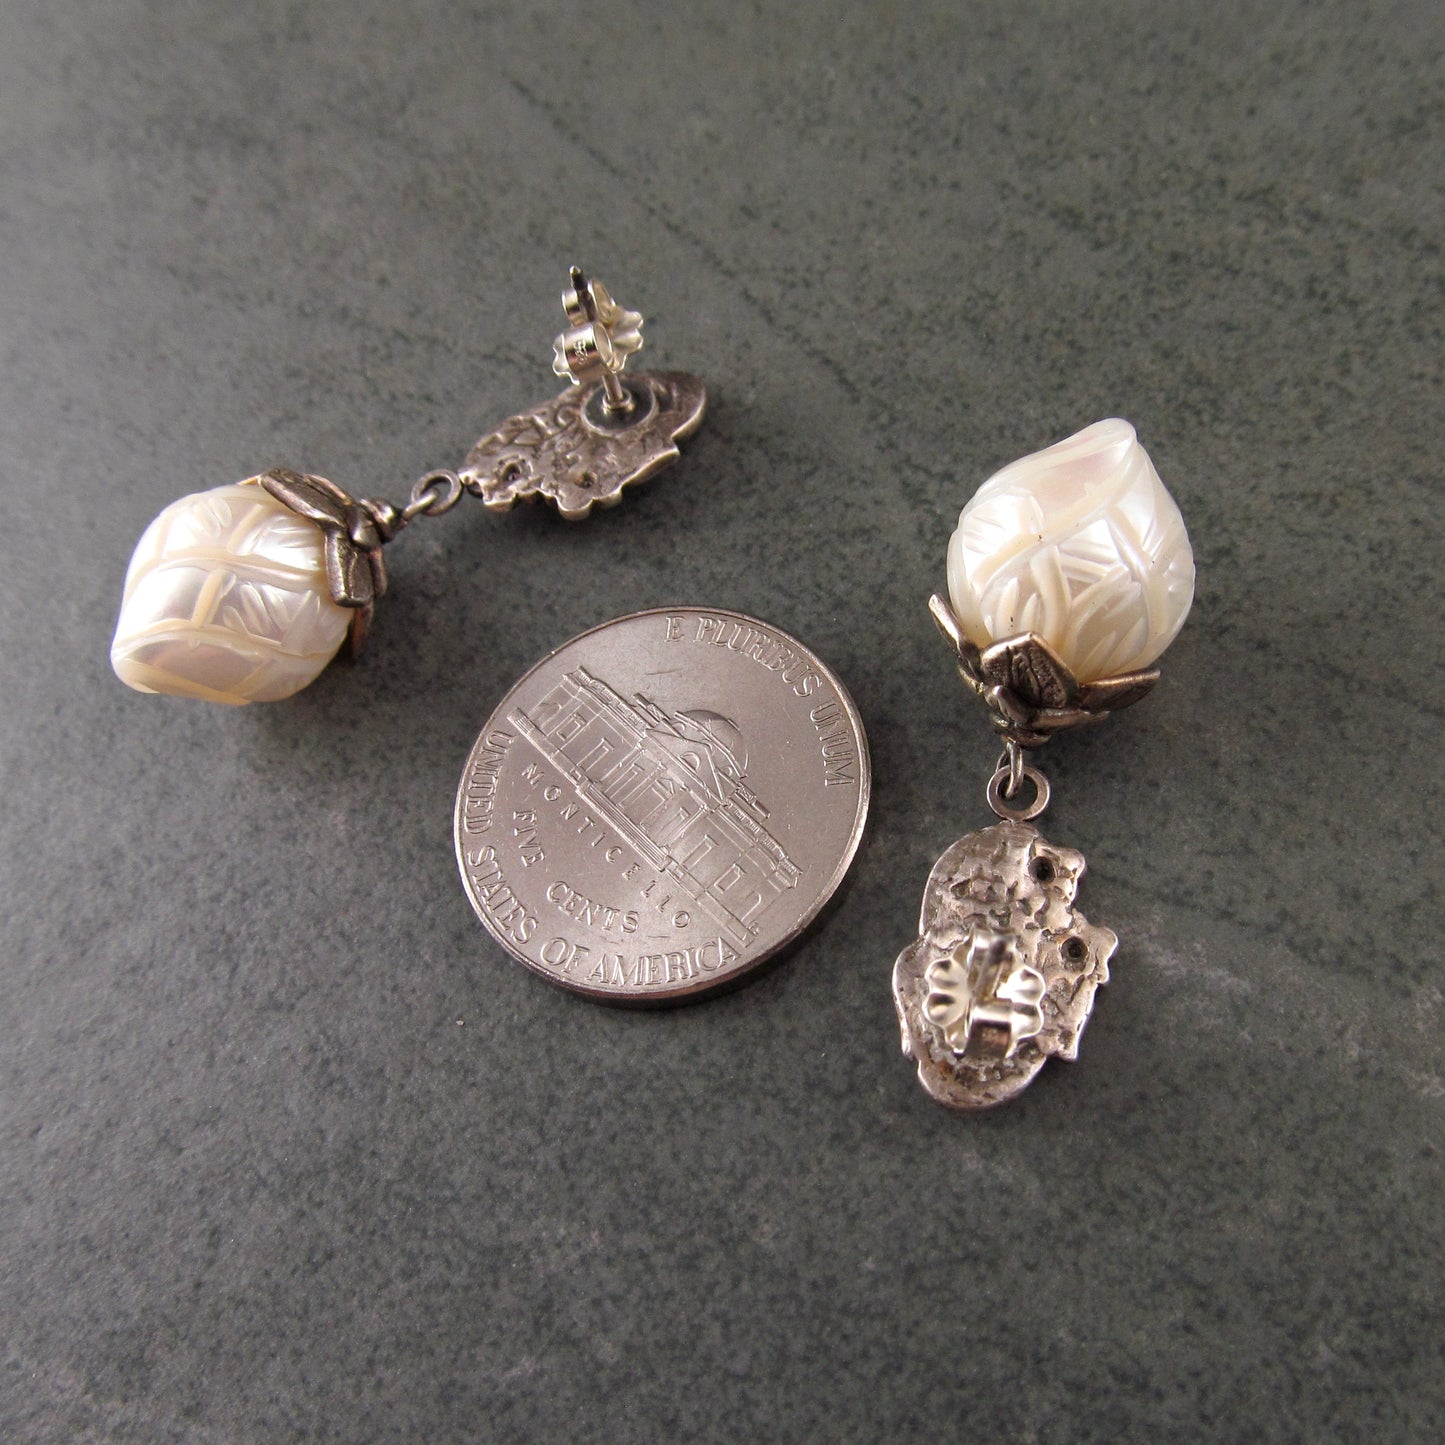 Carved pearl flower bud earrings in fine silver with pastel sapphires